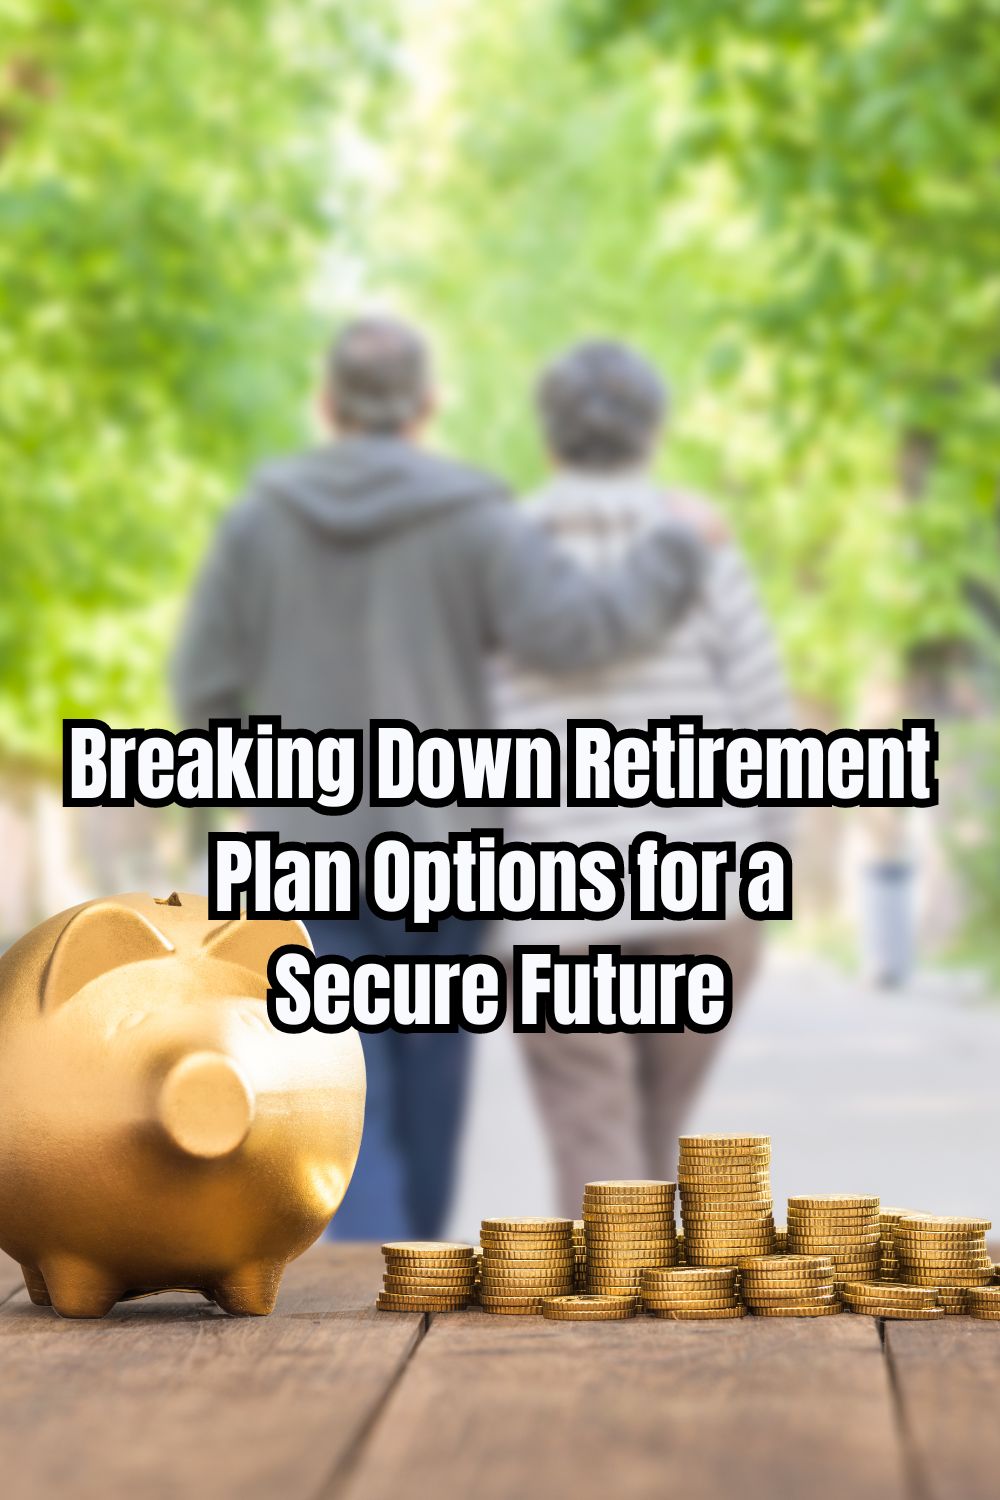 Breaking Down Retirement Plan Options for a Secure Future